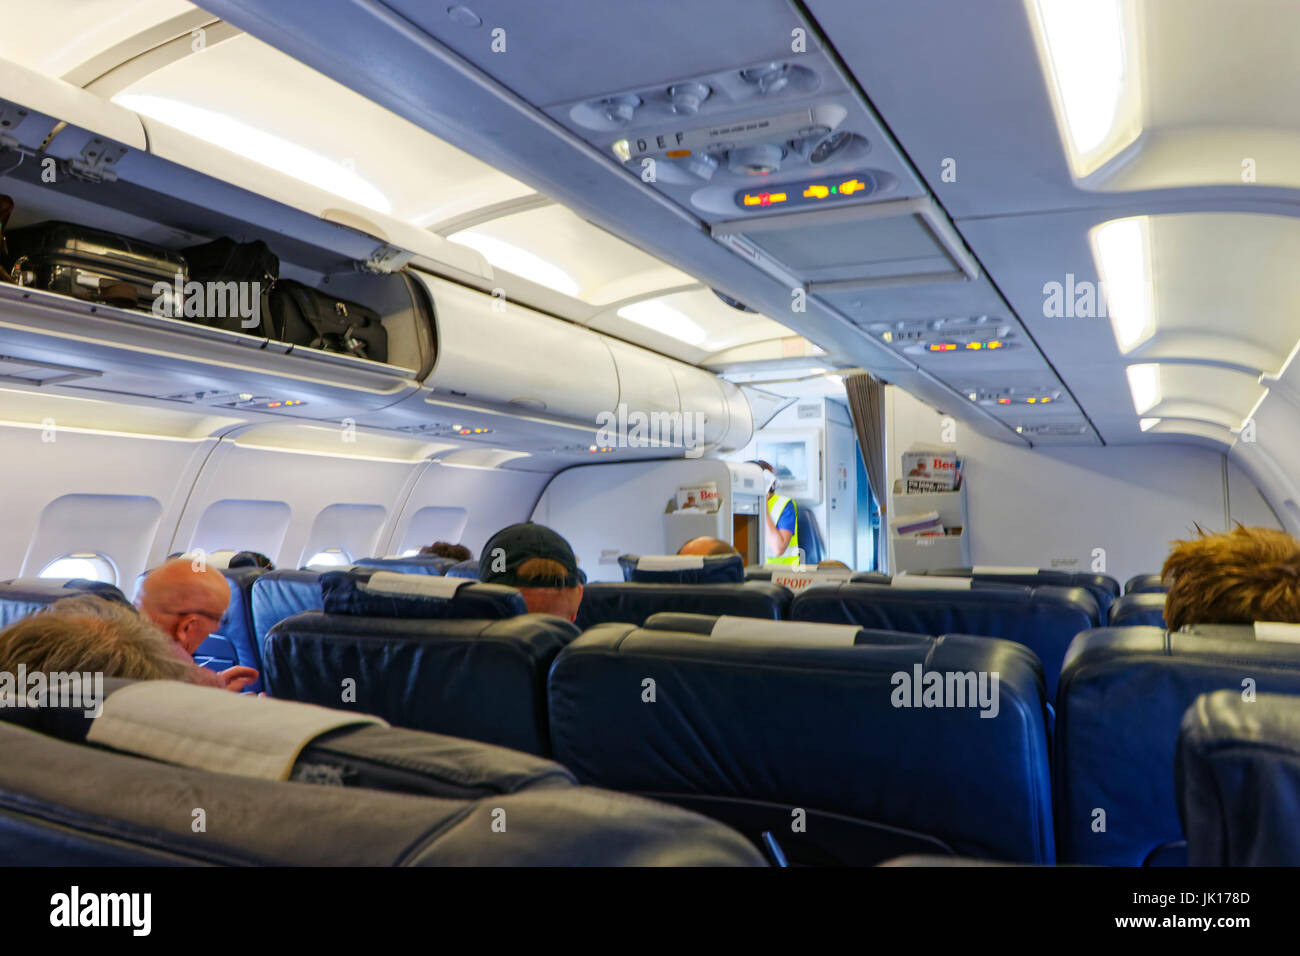 People seated on an aeroplane with open overhead luggage compartments Stock Photo